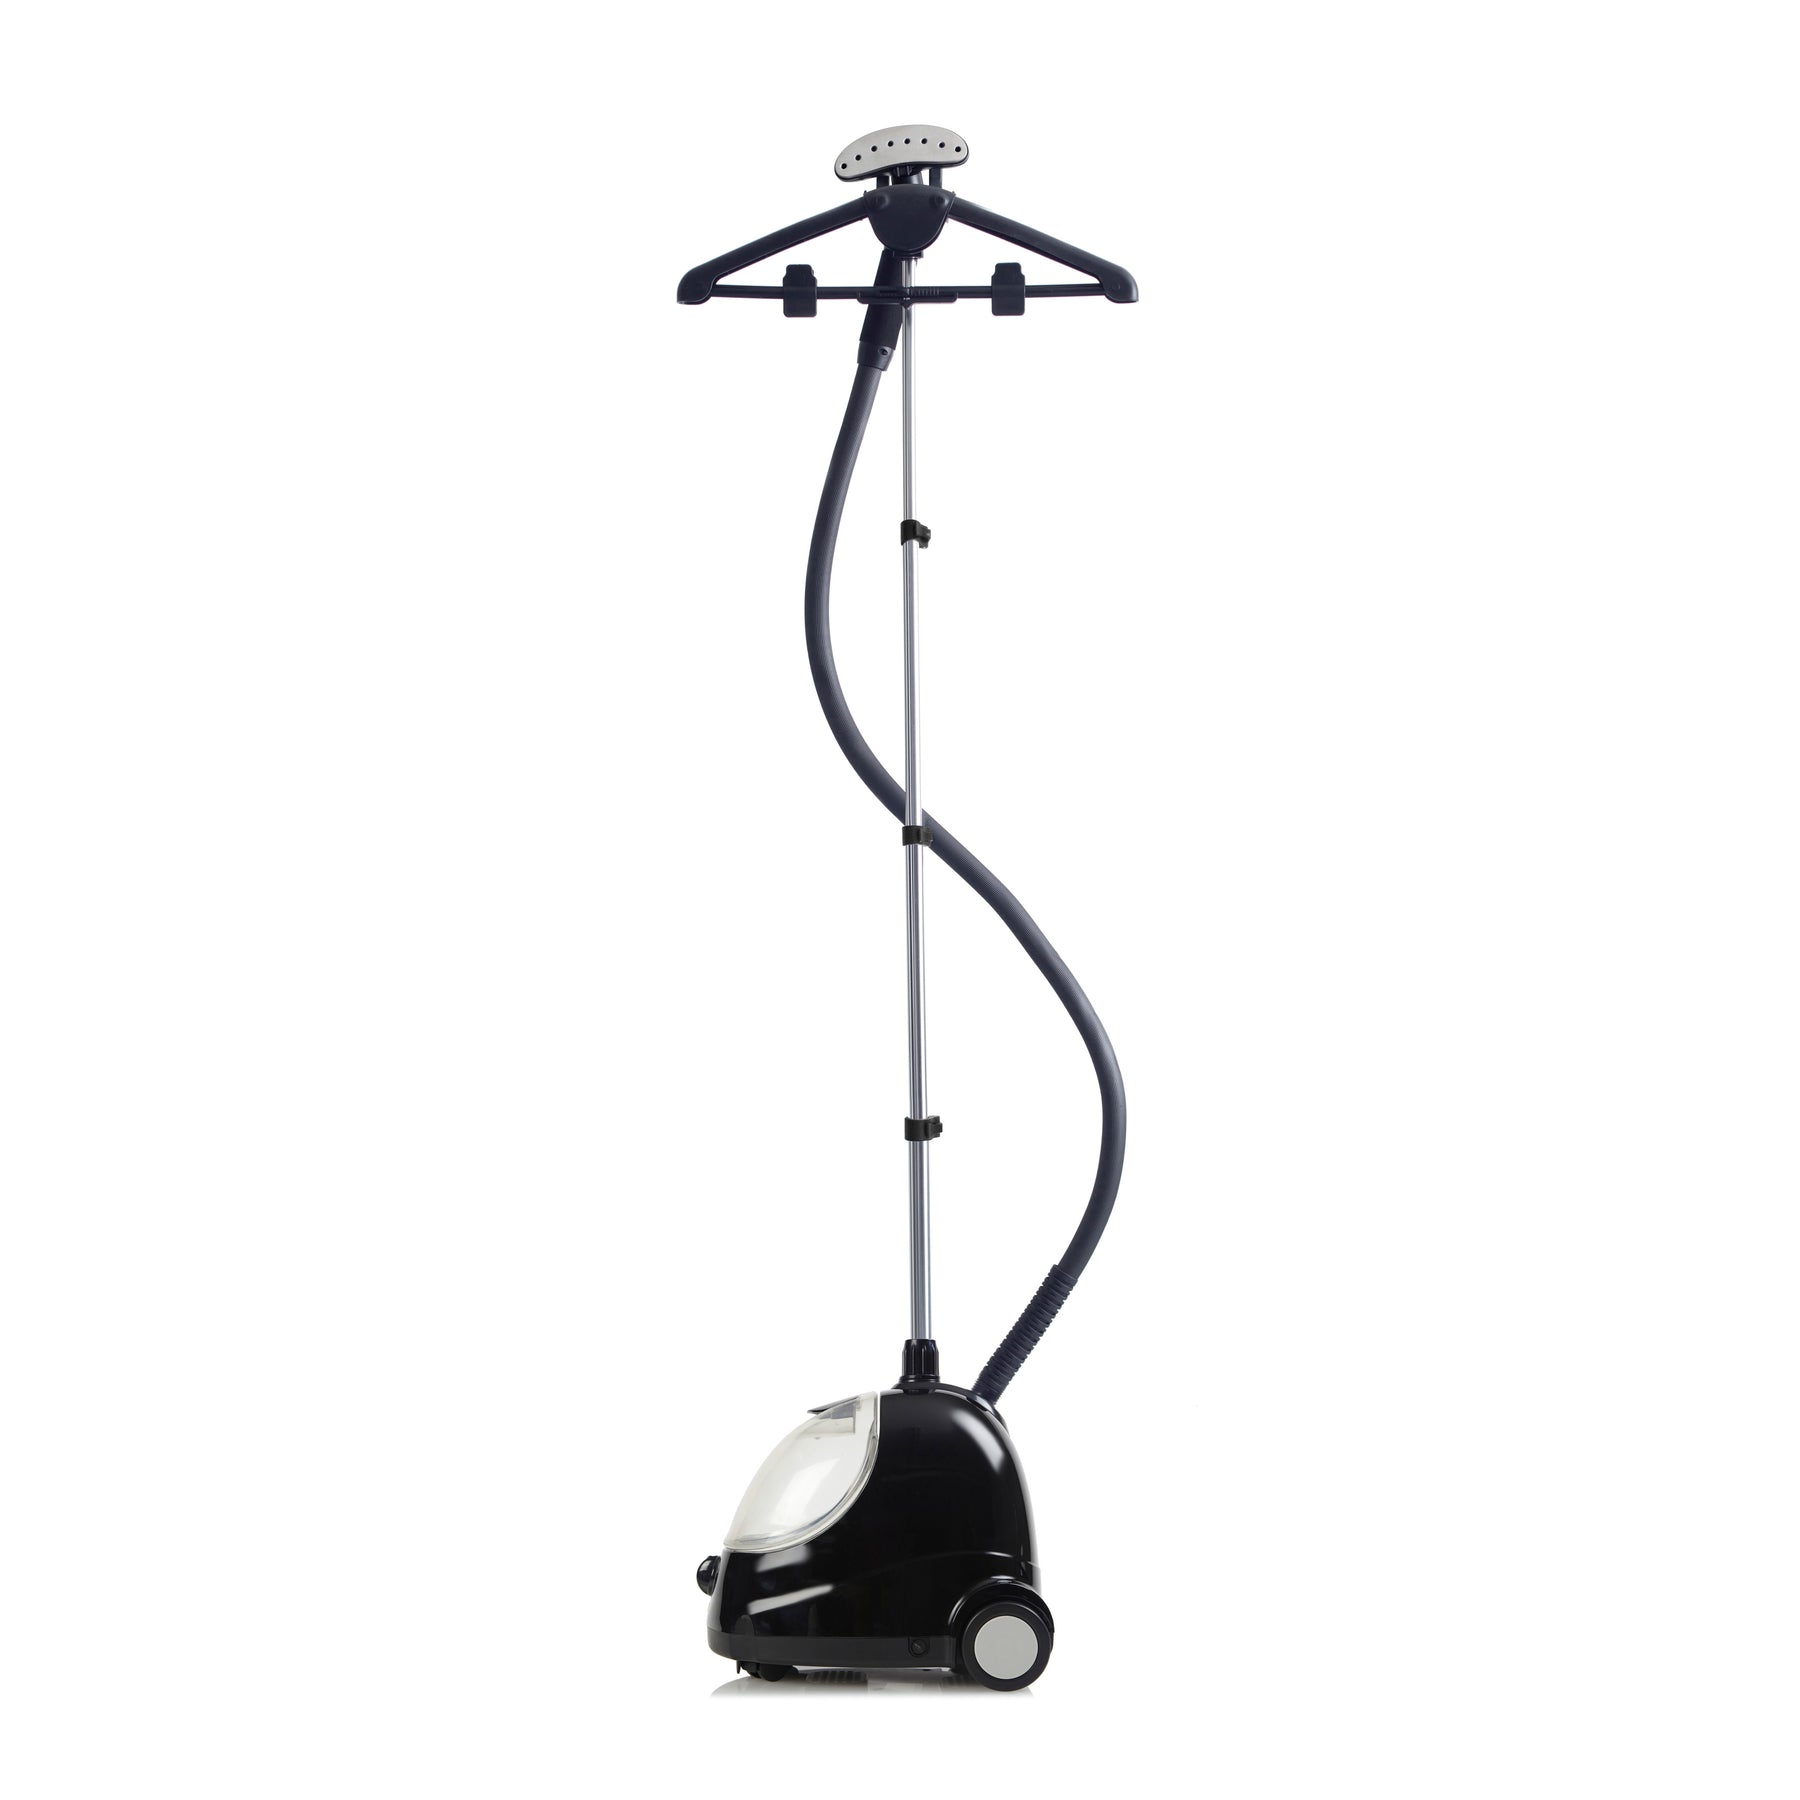 Fridja clothes steamer stood on pure white background